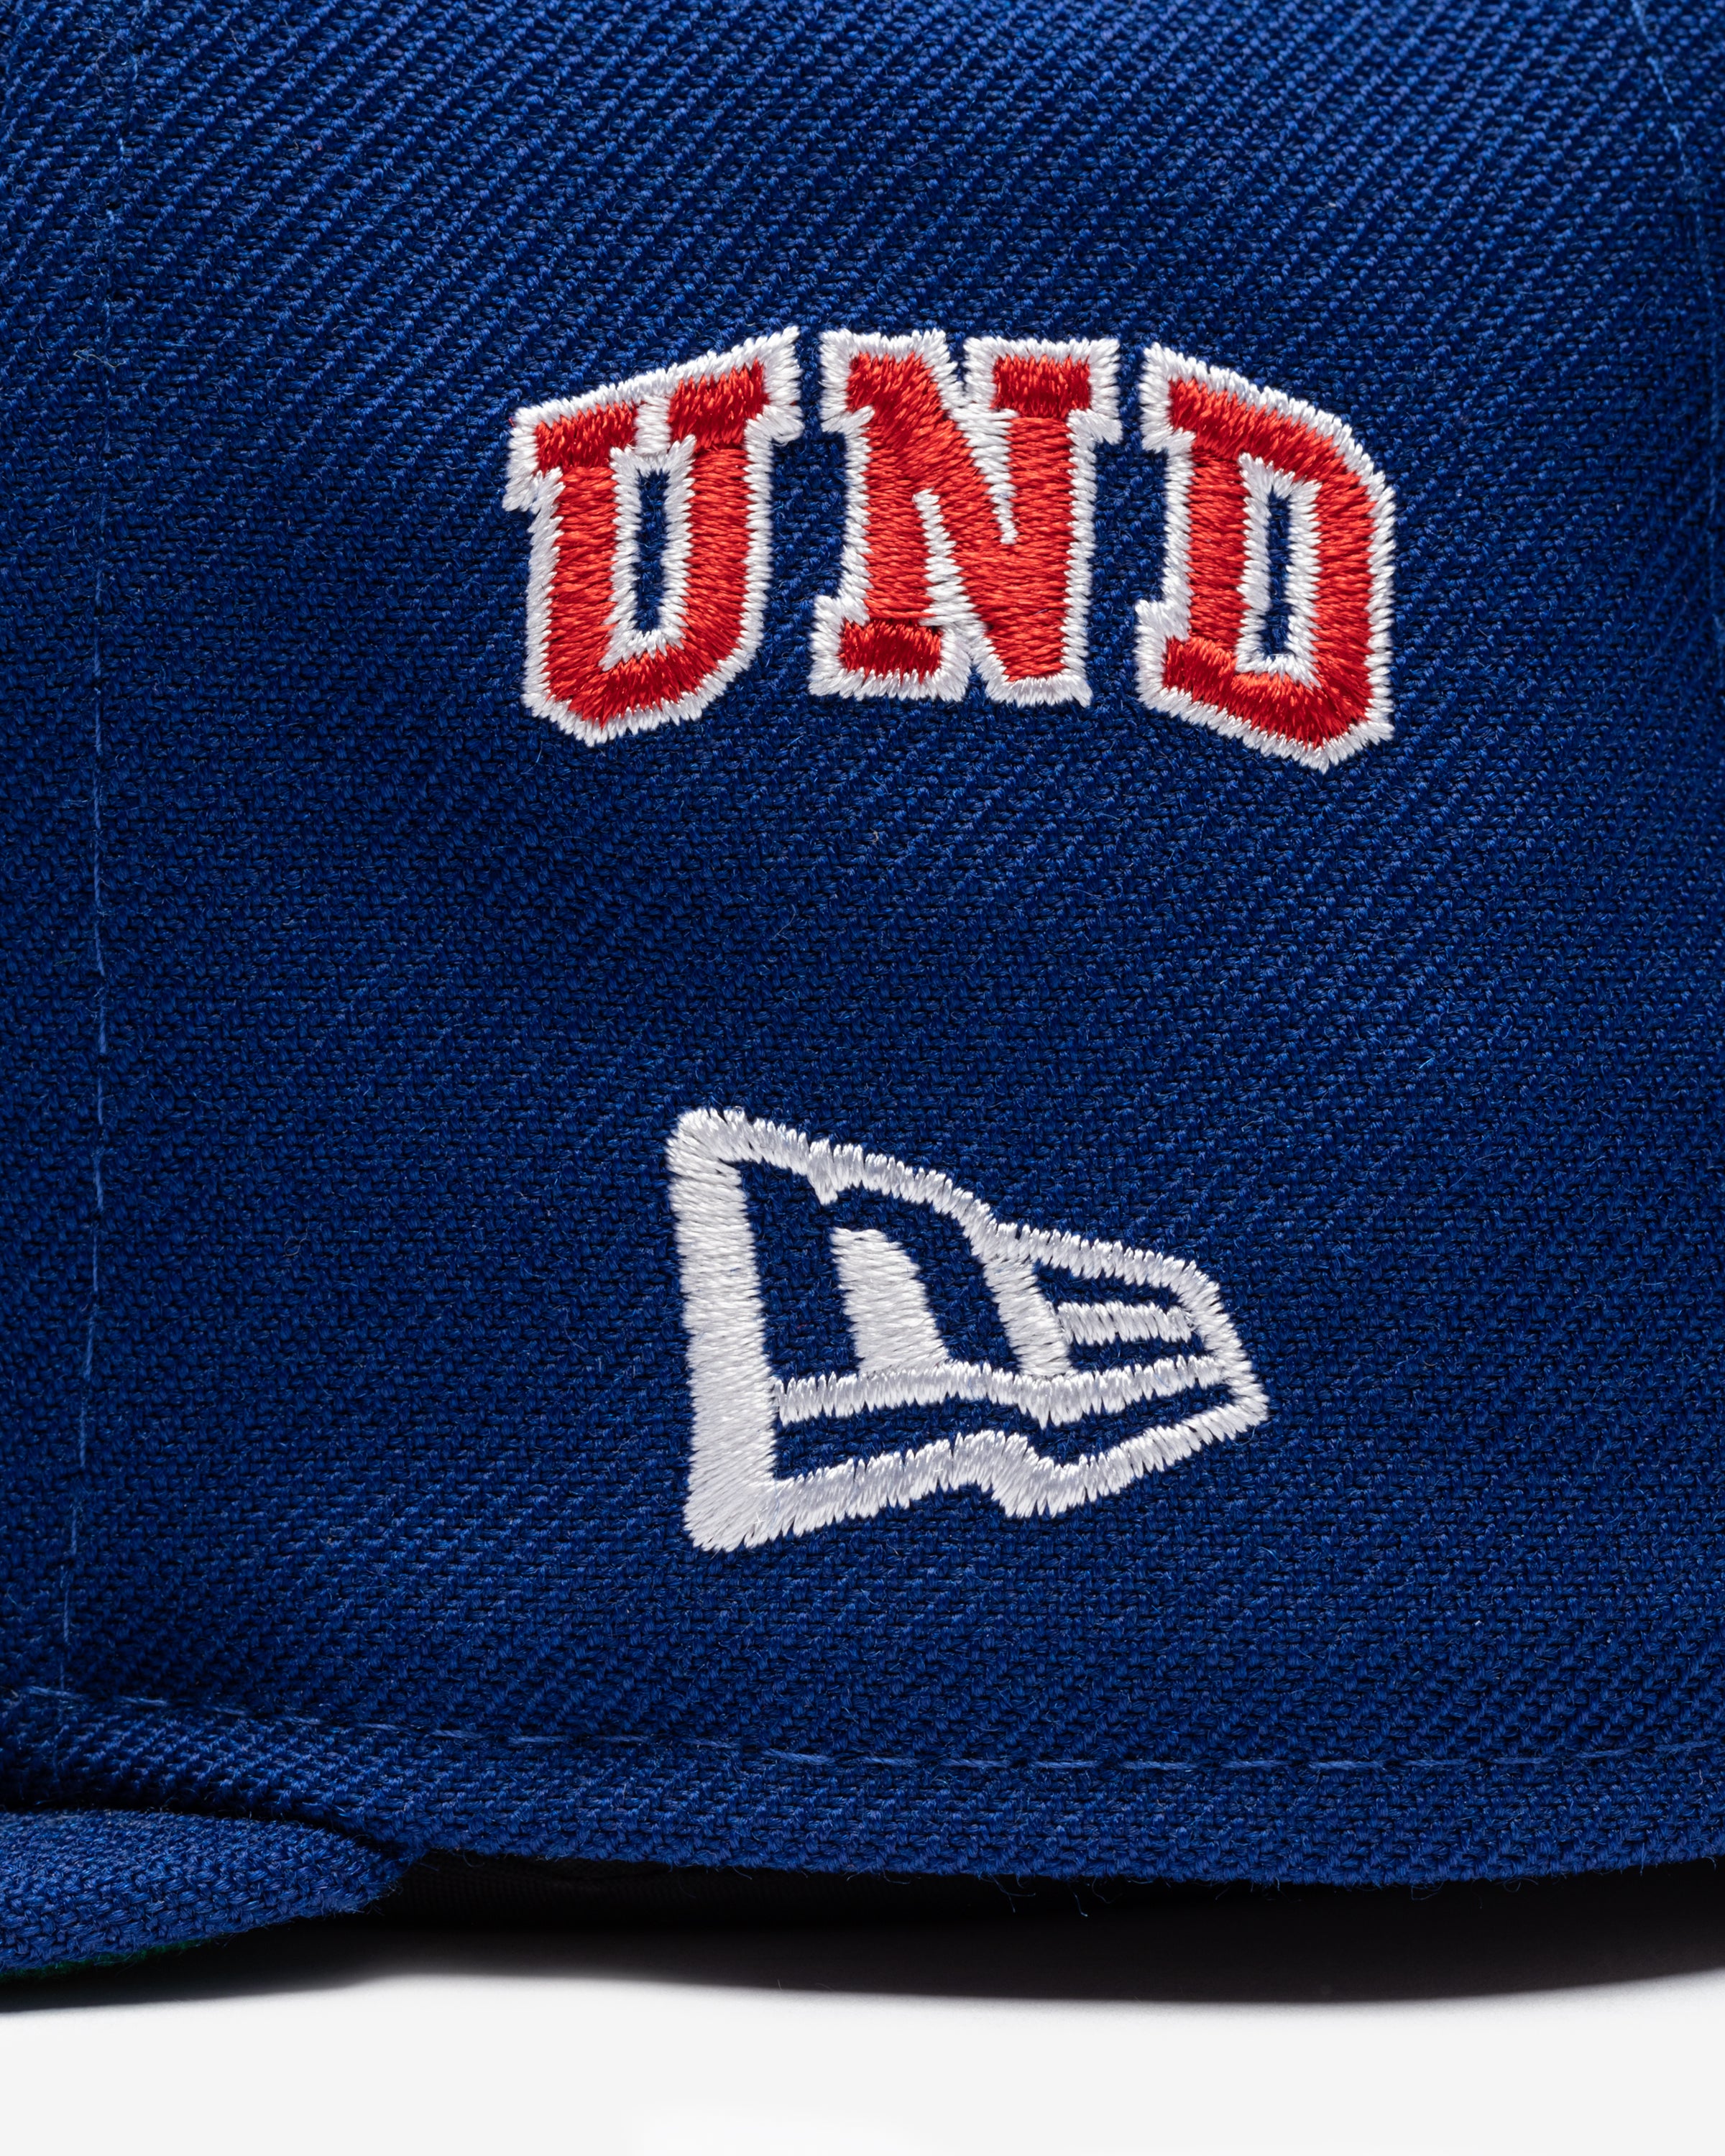 UNDEFEATED X NE X MLB FITTED - CHICAGO CUBS